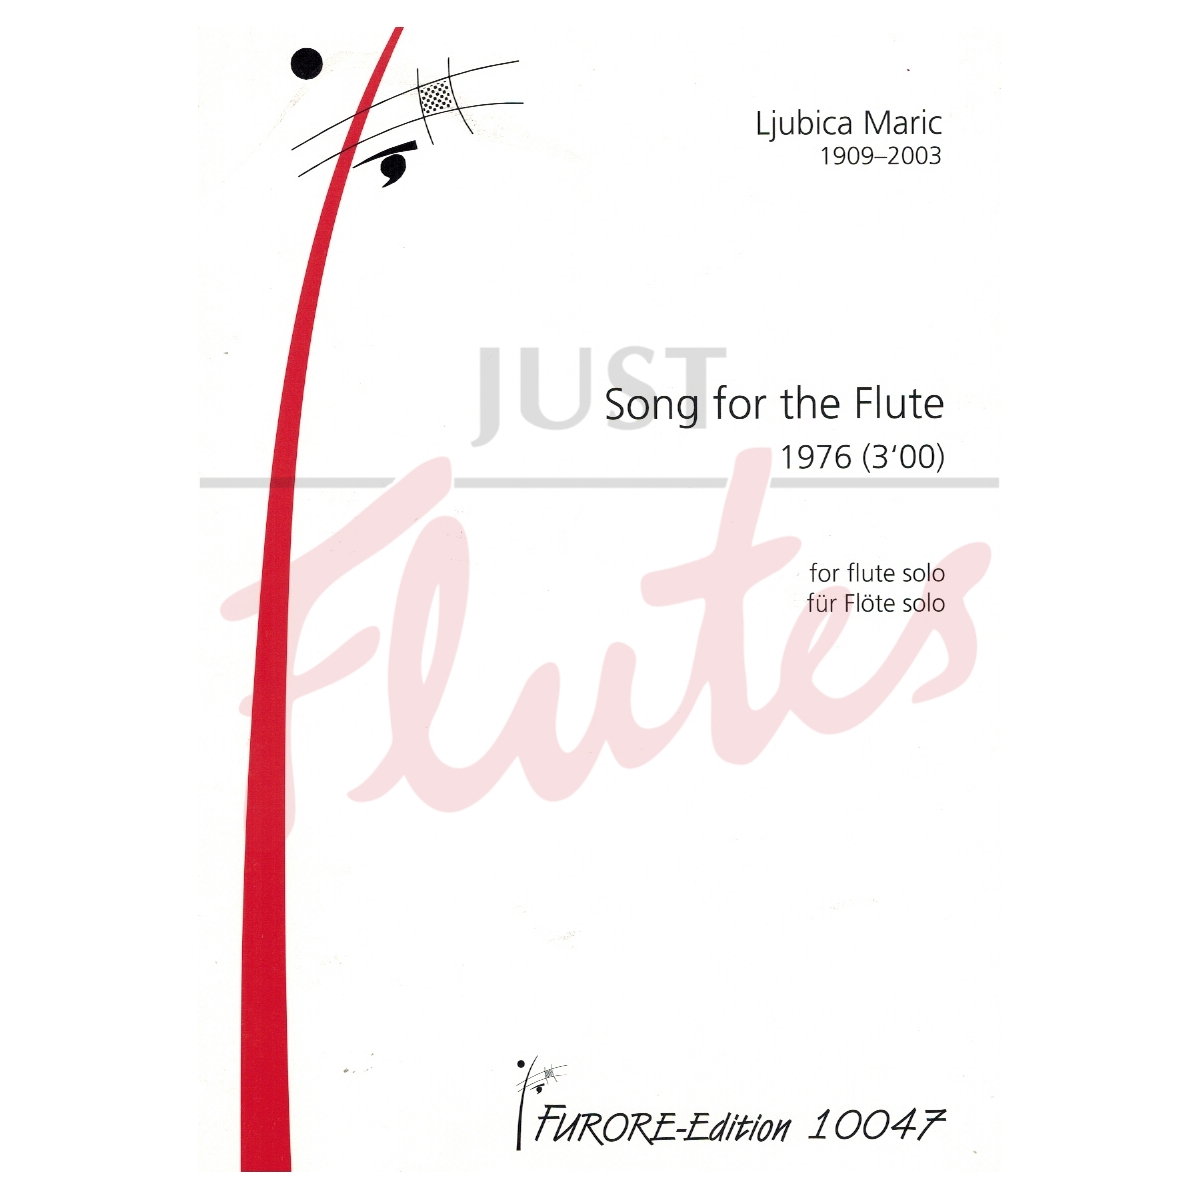 Song for the Flute